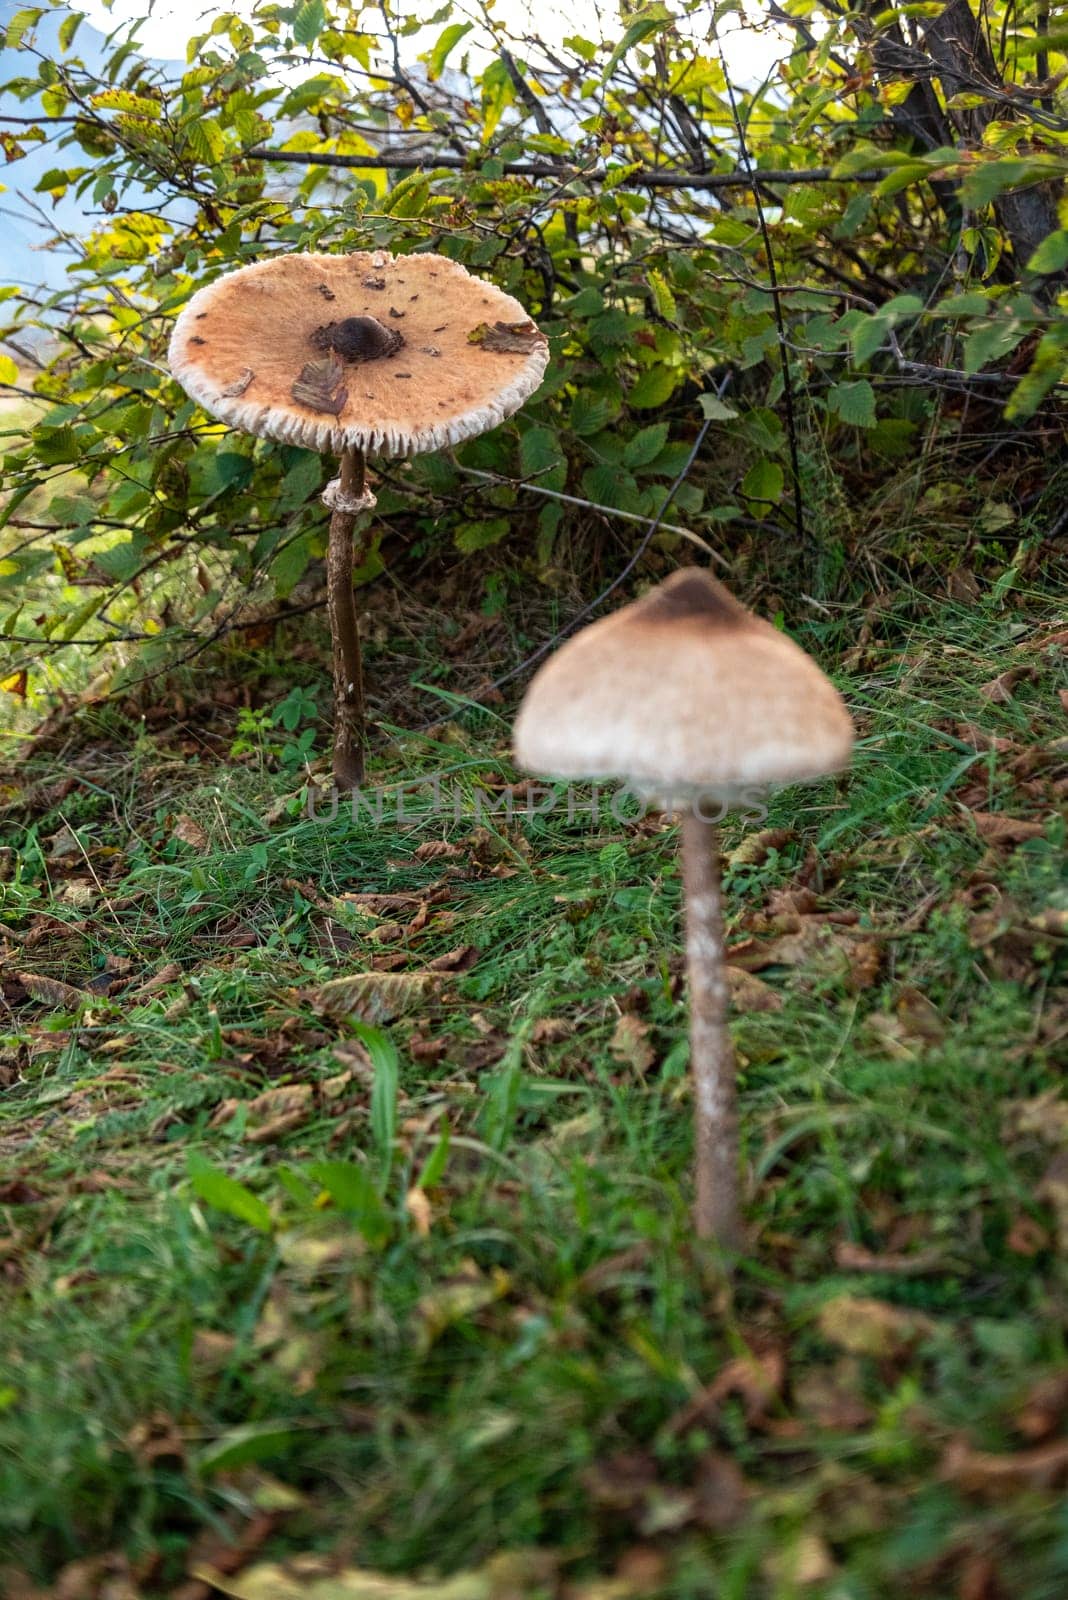 Giant mushrooms in the mountains at lake Como, Italy